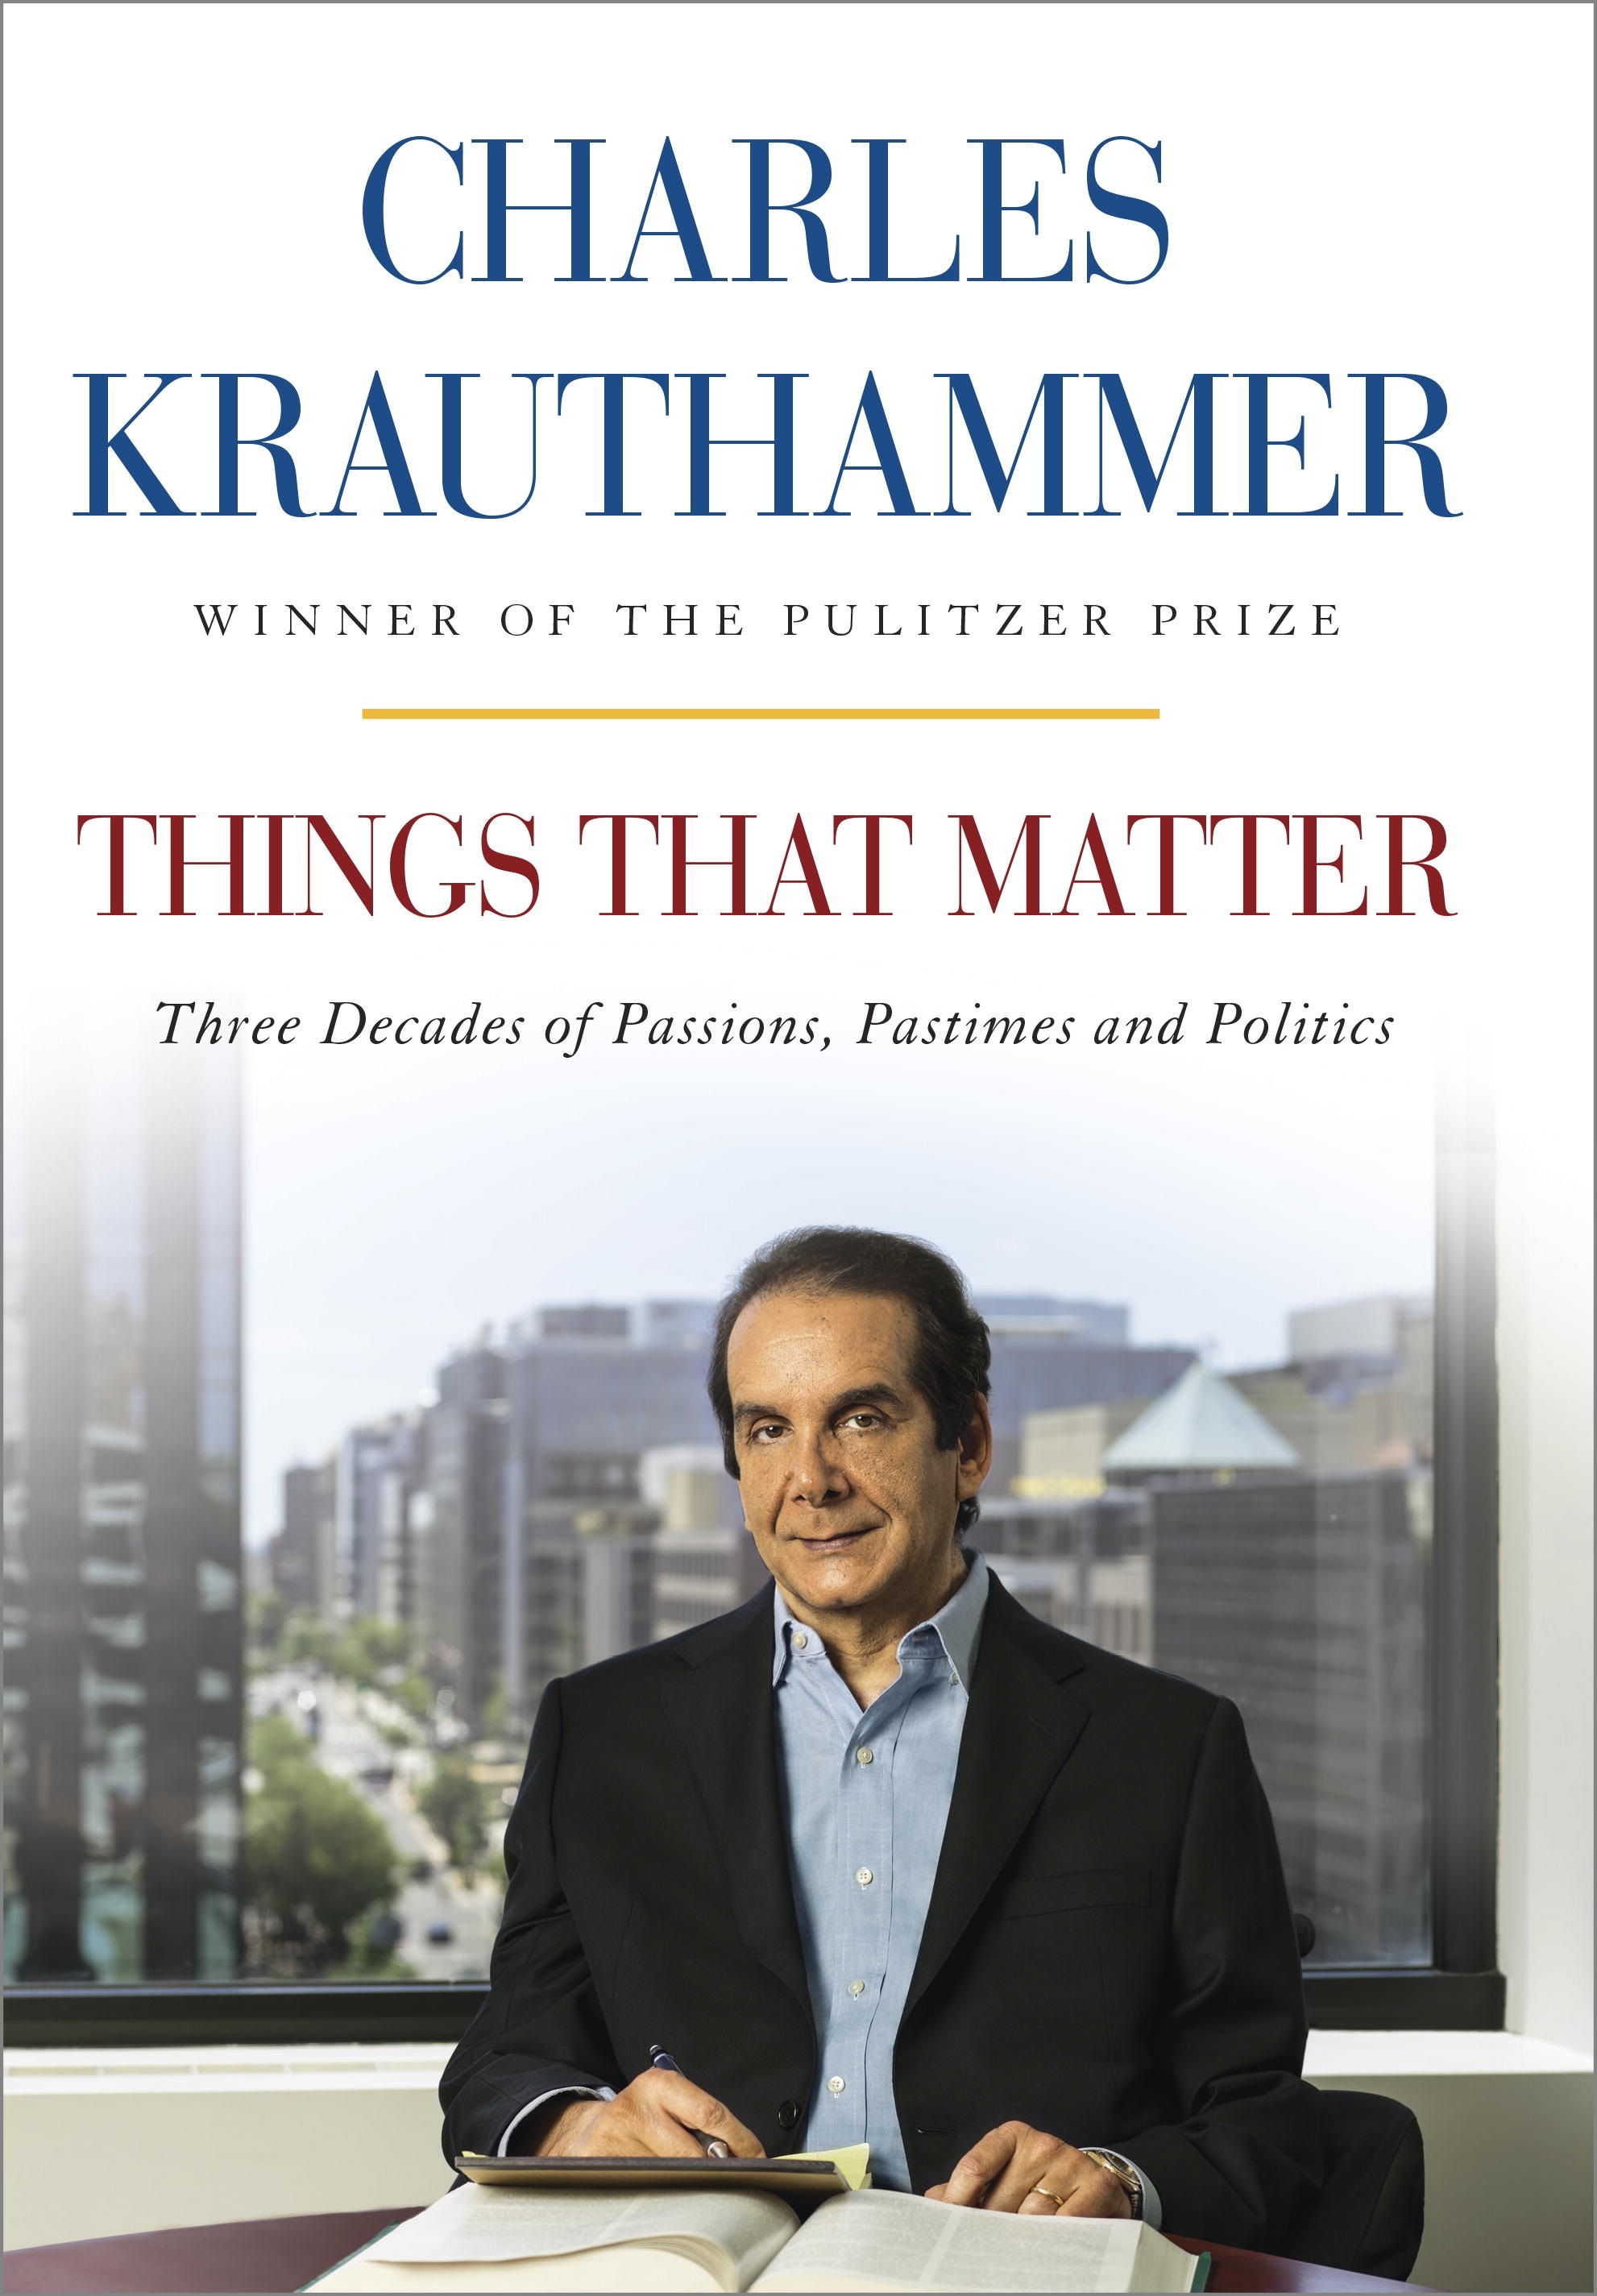 Things That Matter by Charles Krauthammer is a well-written, thought-provoking book